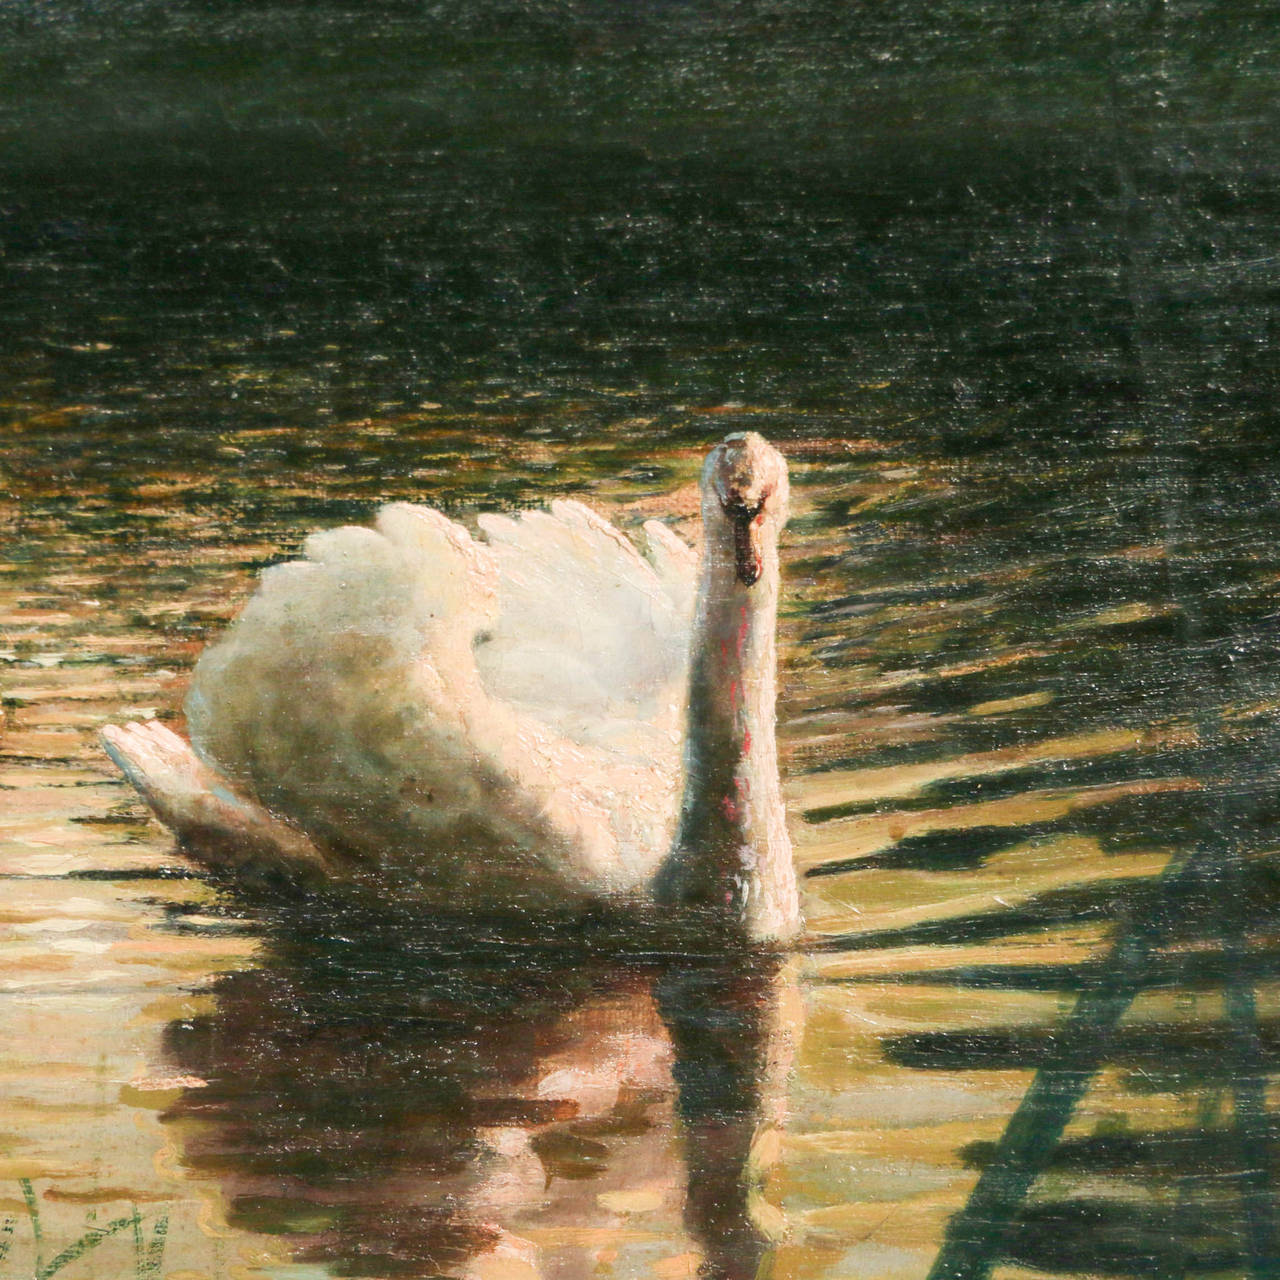 Original oil on canvas painting with serene setting of green forest and lake with white swans.  Signed P. Jørgensen and circa 1912.